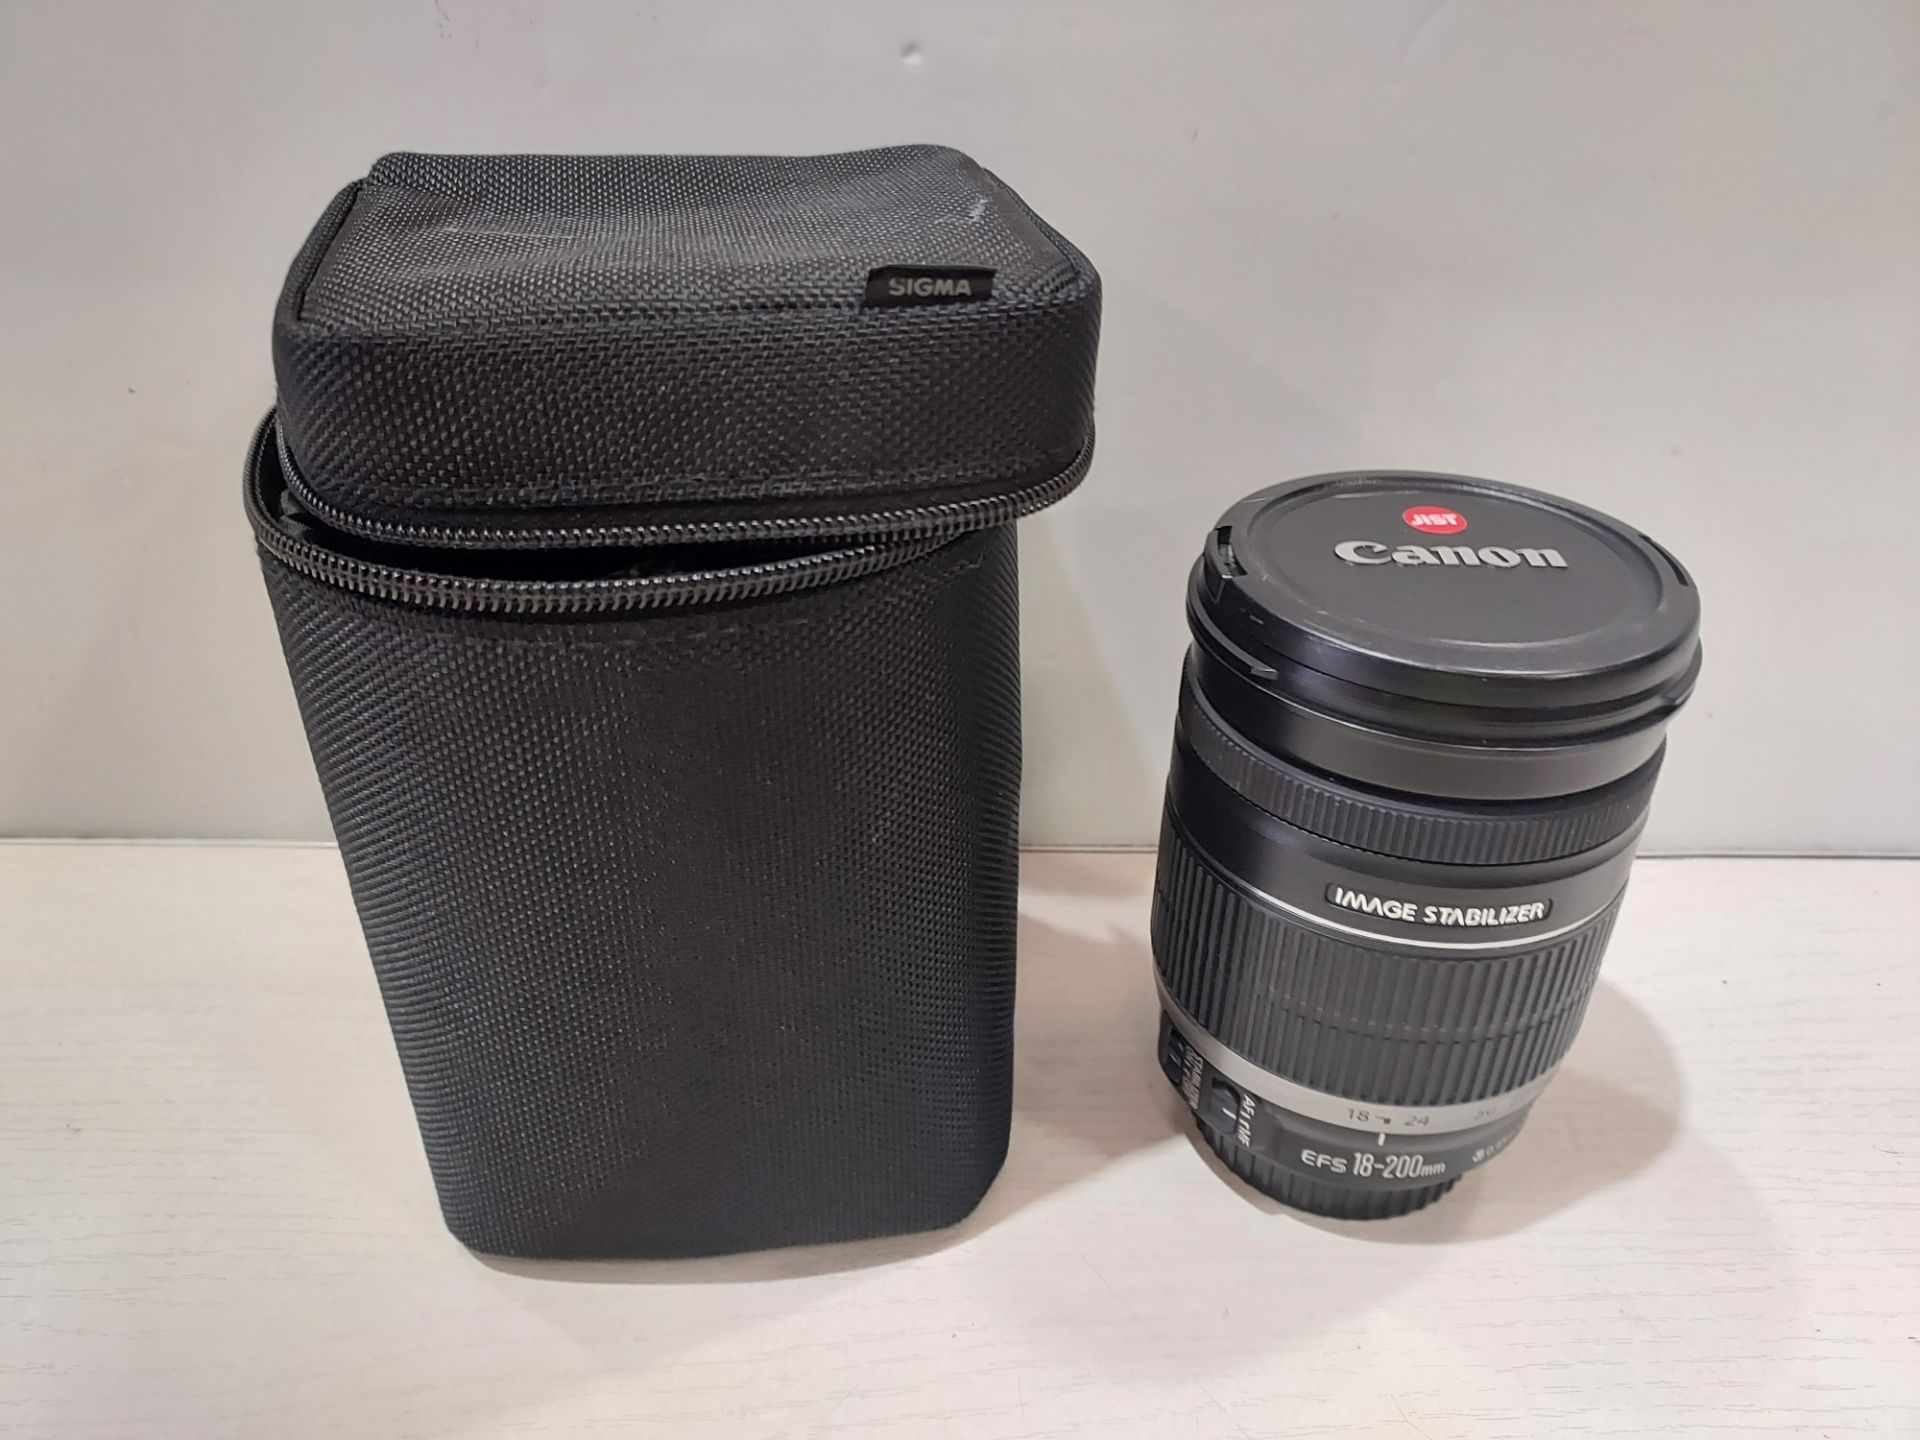 CANON EF-S 18-200 MM F/3 5-5 6 IS GENERAL PURPOSE ZOOM LENS WITH SLEEVE - Image 2 of 2